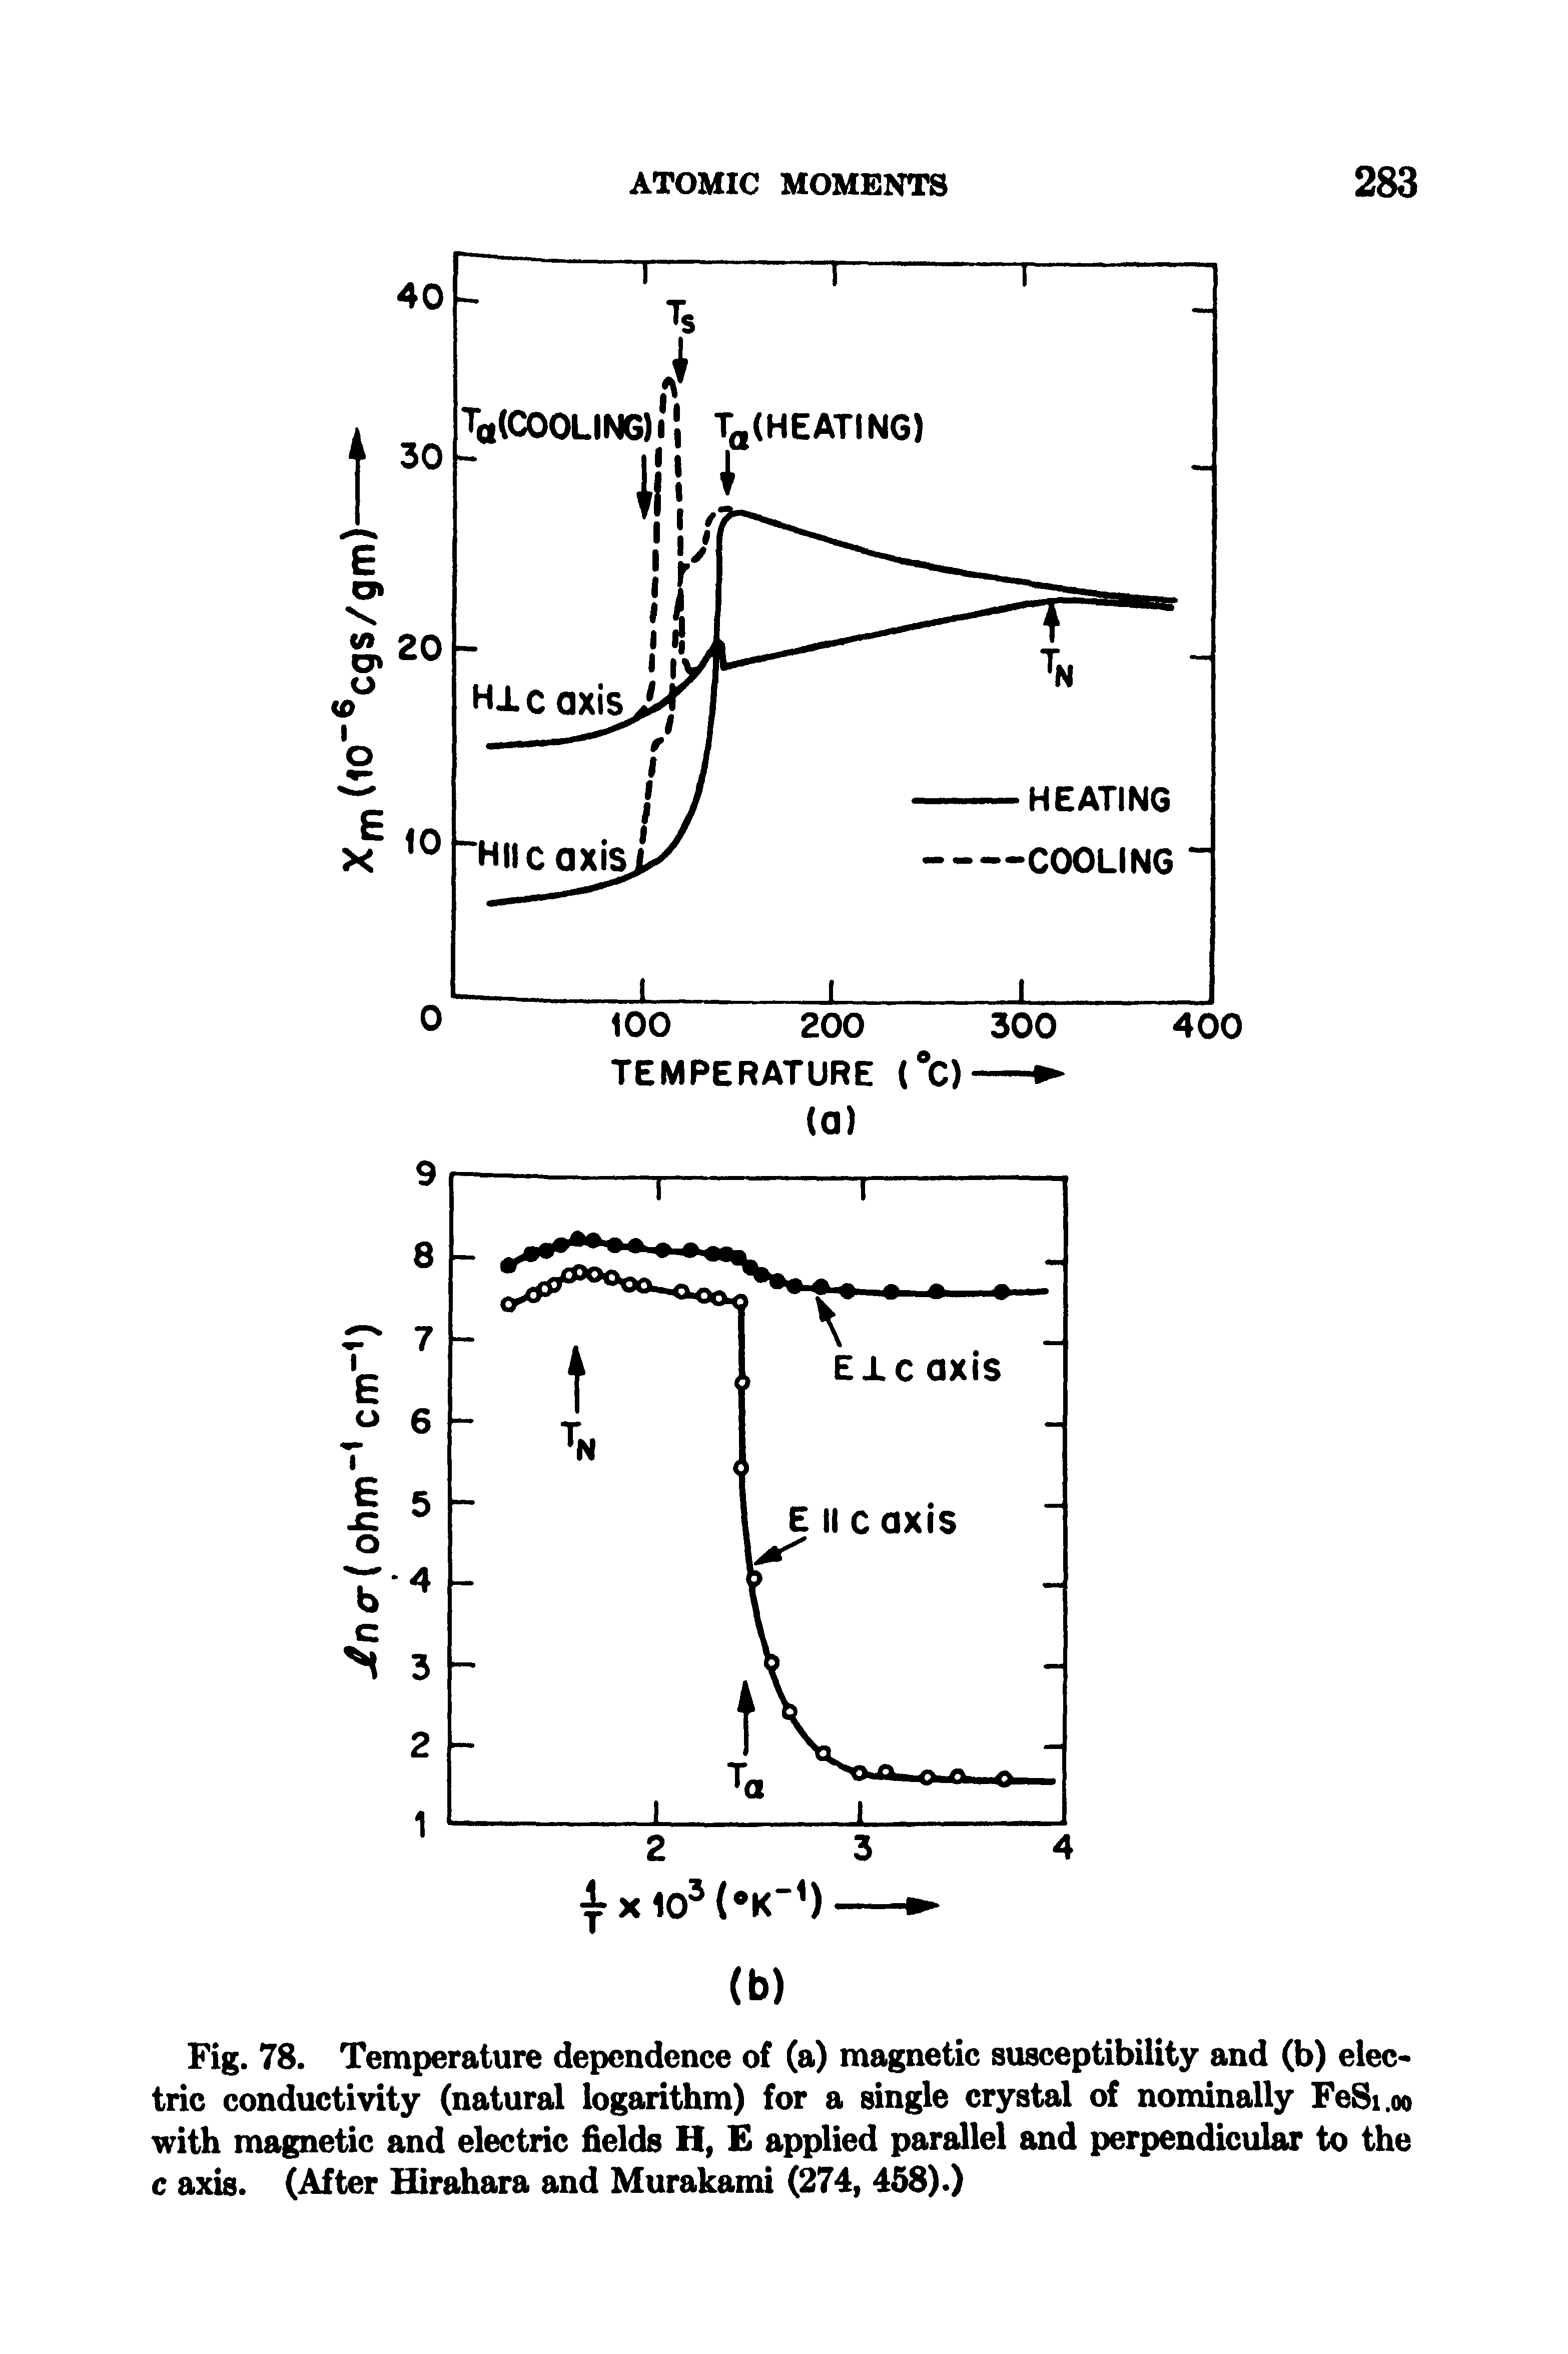 Fig. 78. Temperature dependence of (a) magnetic susceptibility and (b) electric conductivity (natural logarithm) for a single crystal of nominally FeSi.oo with magnetic and electric fields H, E applied parallel and perpendicular to the c axis. (After Hirahara and Murakami (274, 458).)...